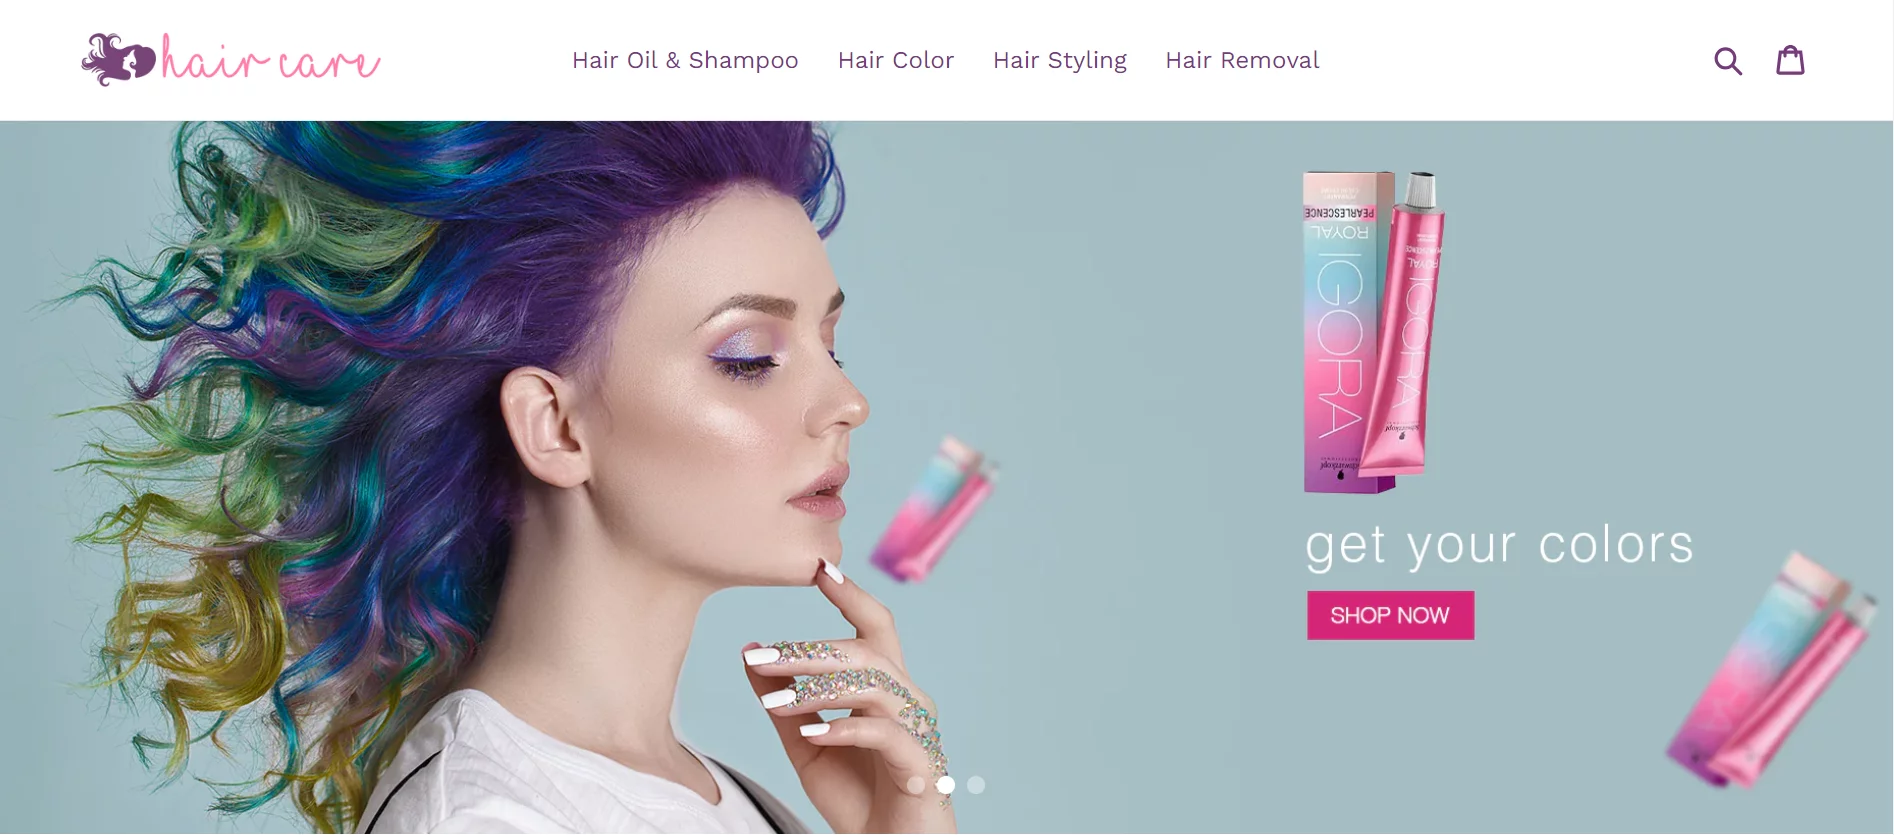 Where To Find Prebuilt Shopify Hair Salon Product Store?